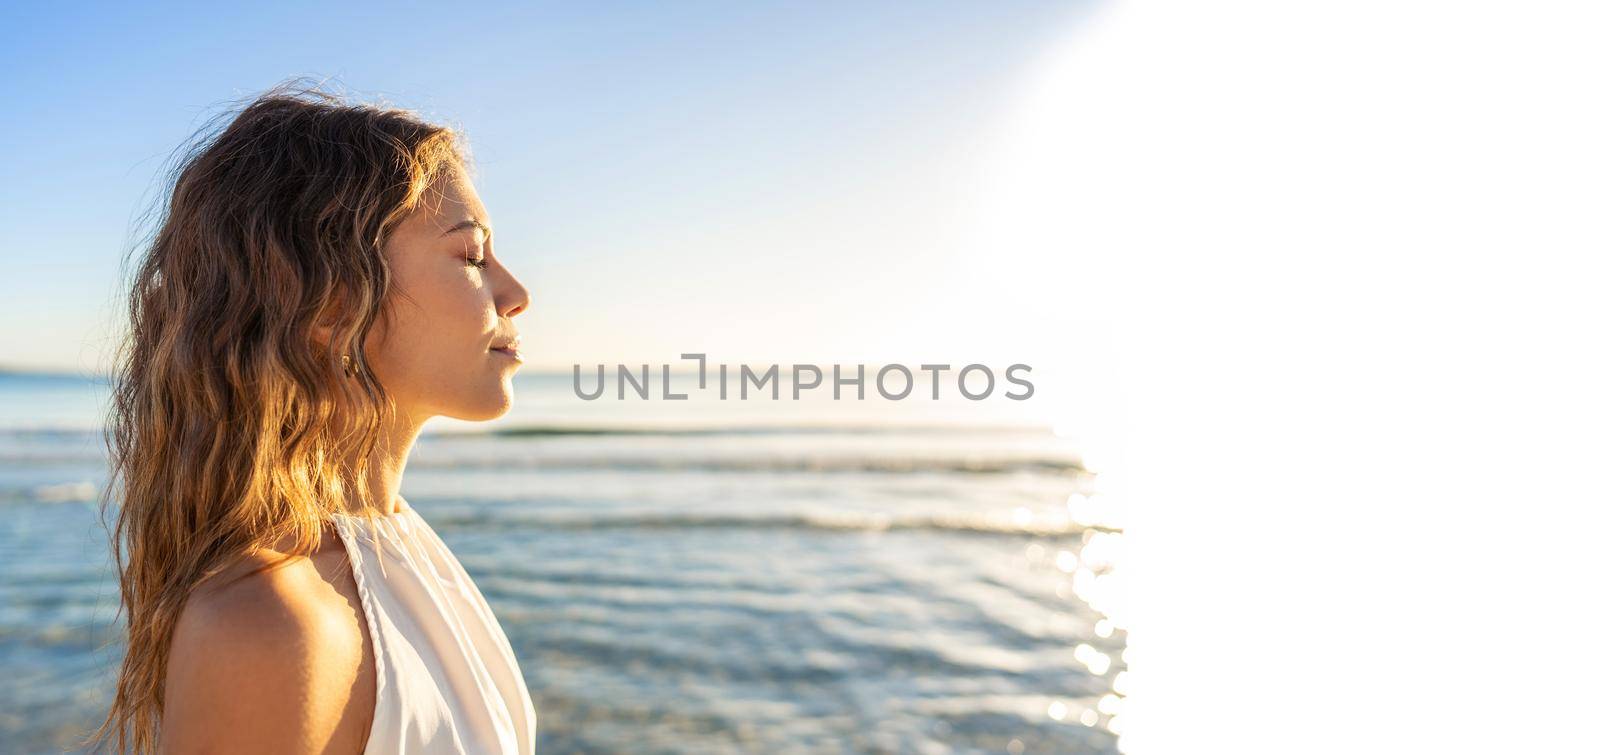 Profile portrait of young beautiful Caucasian blond woman with closed eyes in a white boho dress getting kissed by sunlight at sunset or dawn at beach with ocean sea in background and white copy space